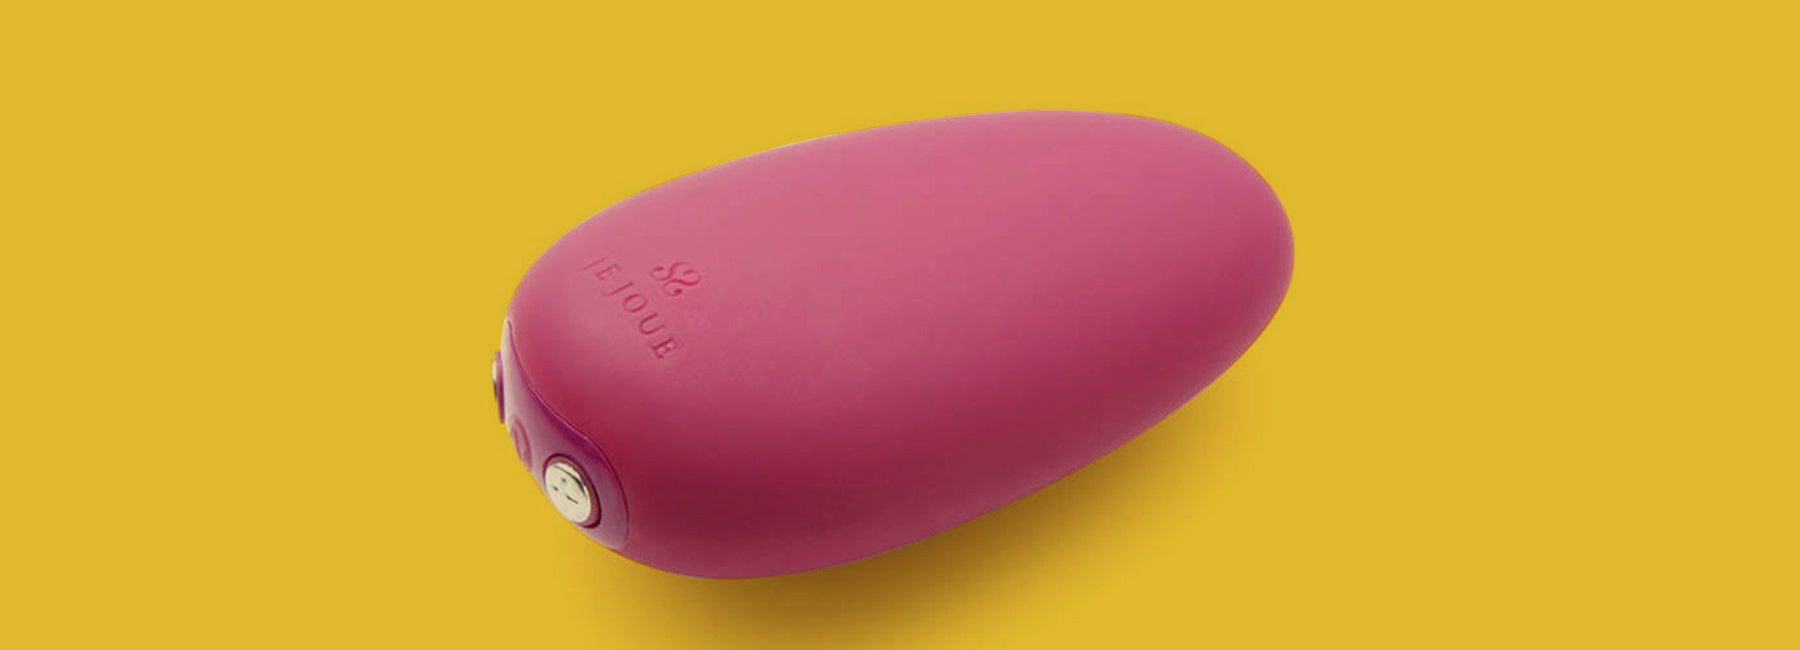 Je Joue Mimi - A Sex Toy for Beginners!